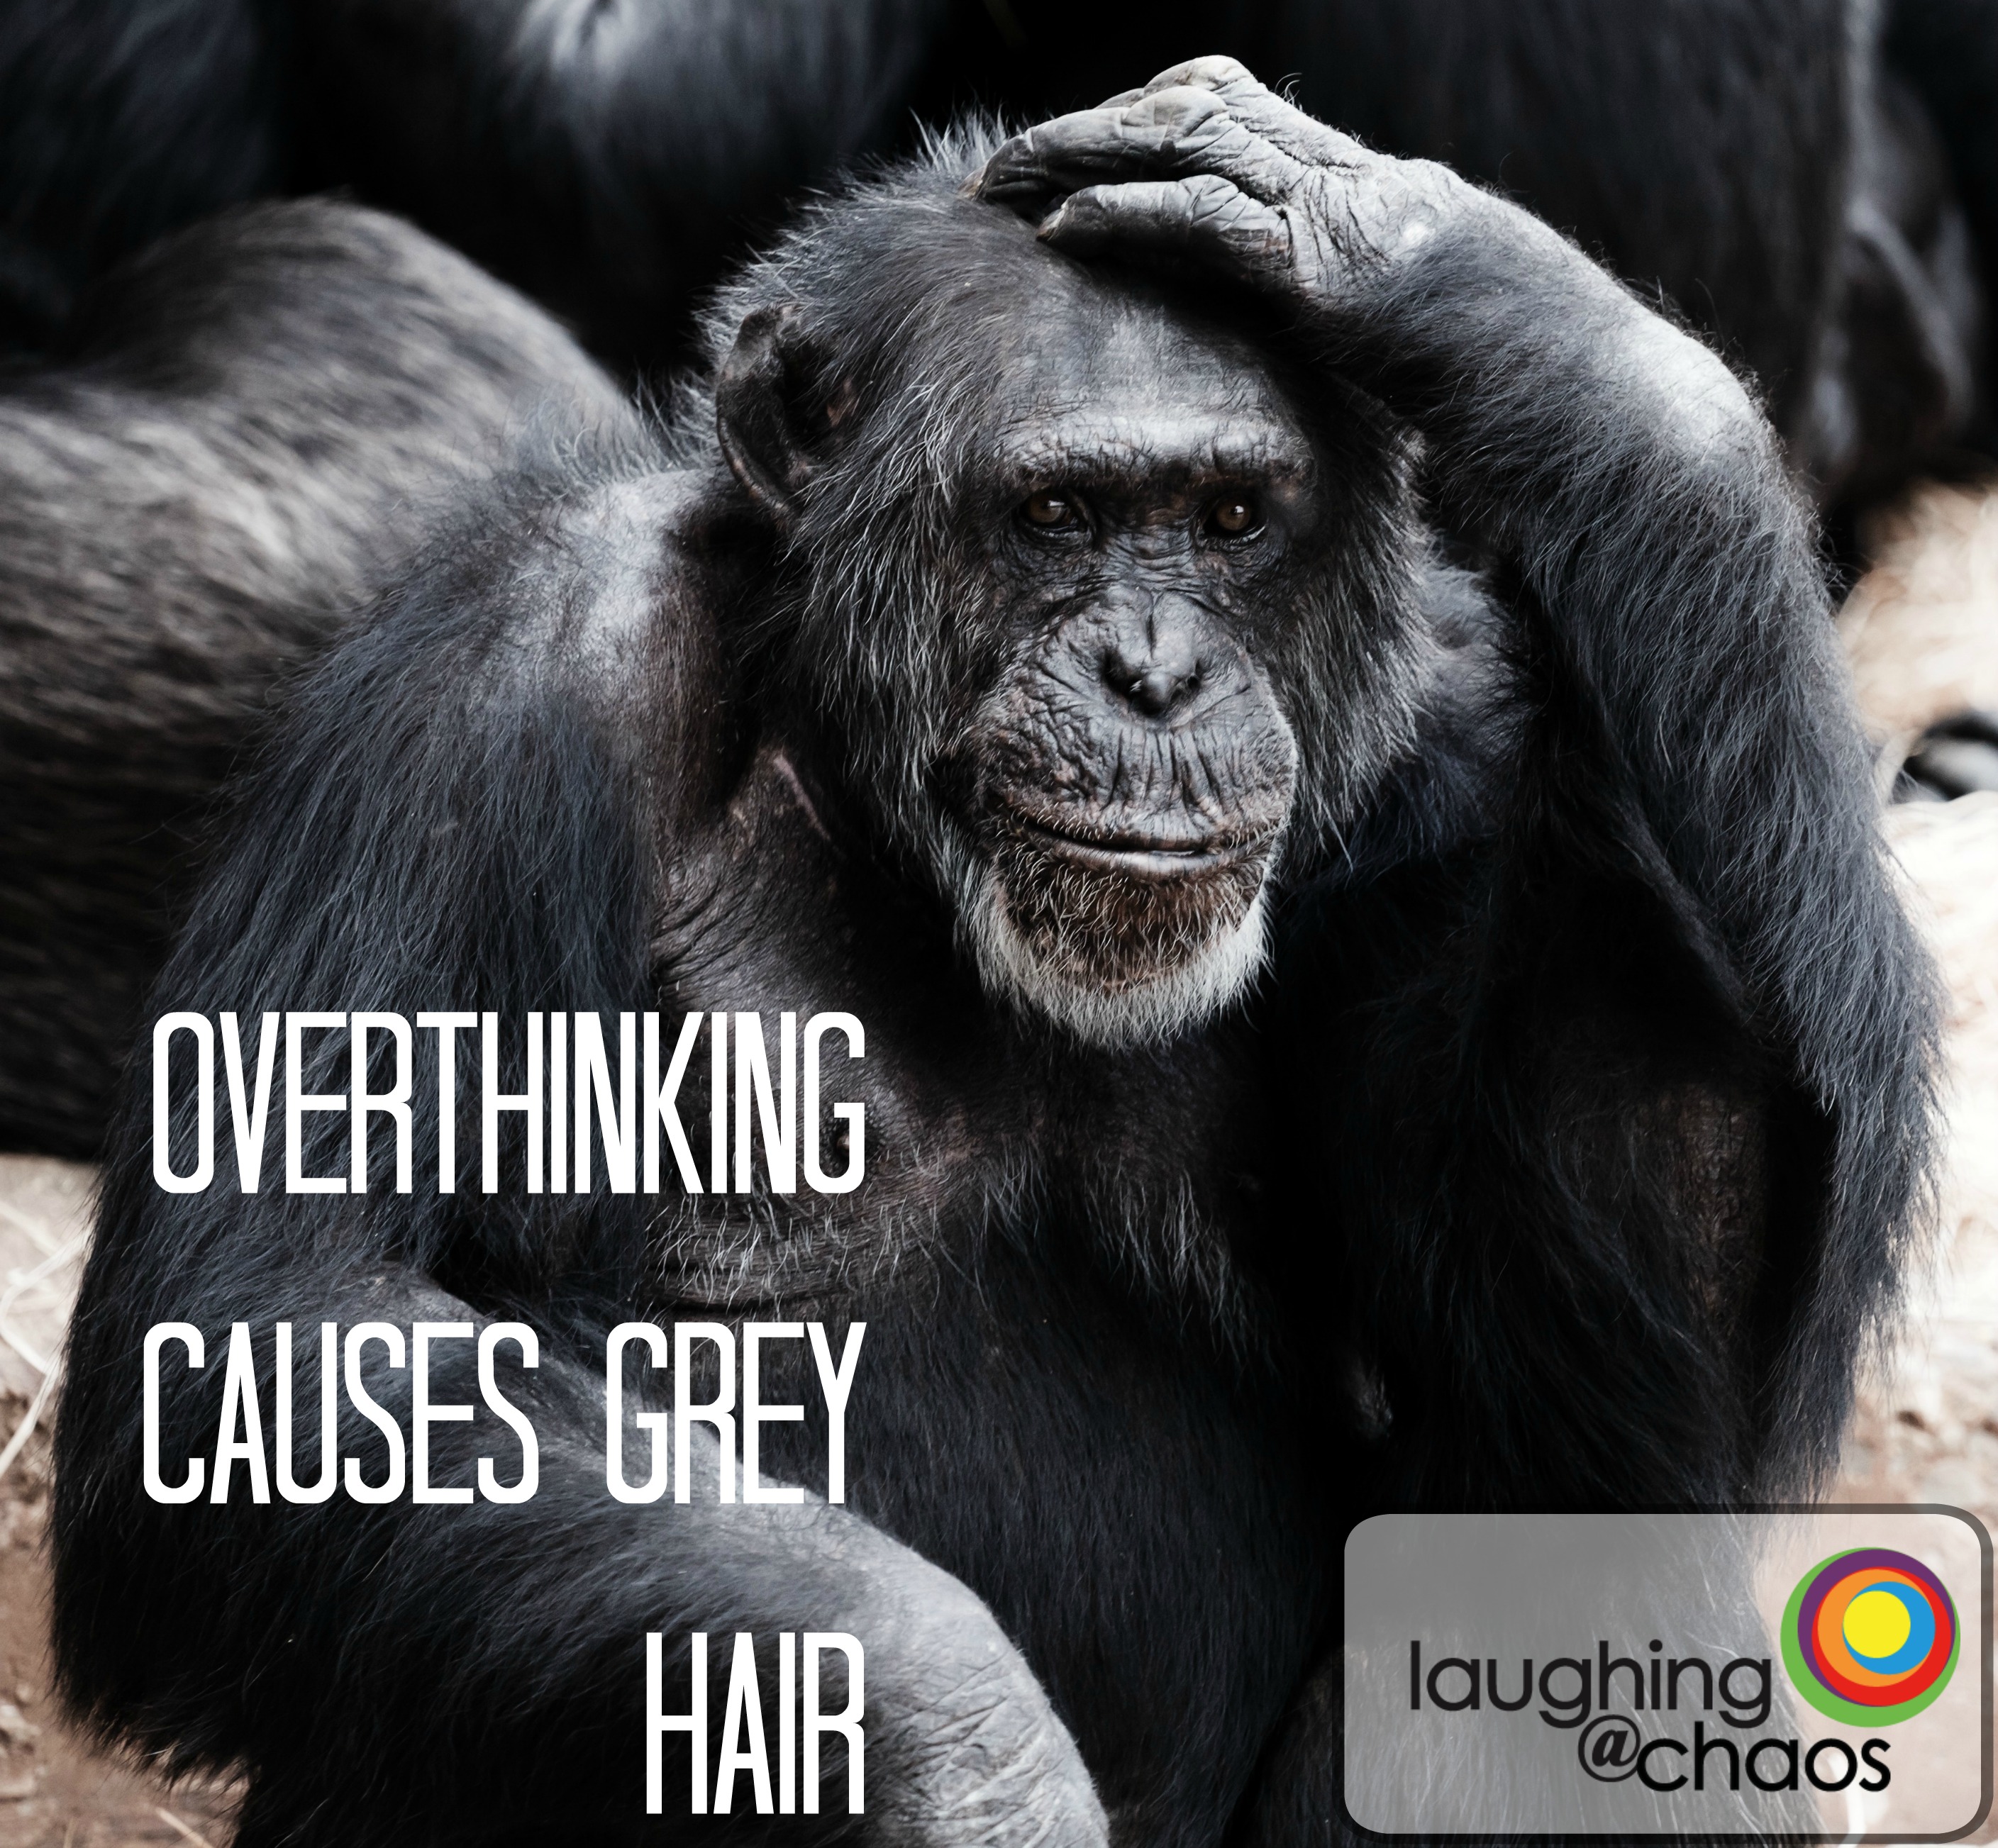 Overthinking causes grey hair